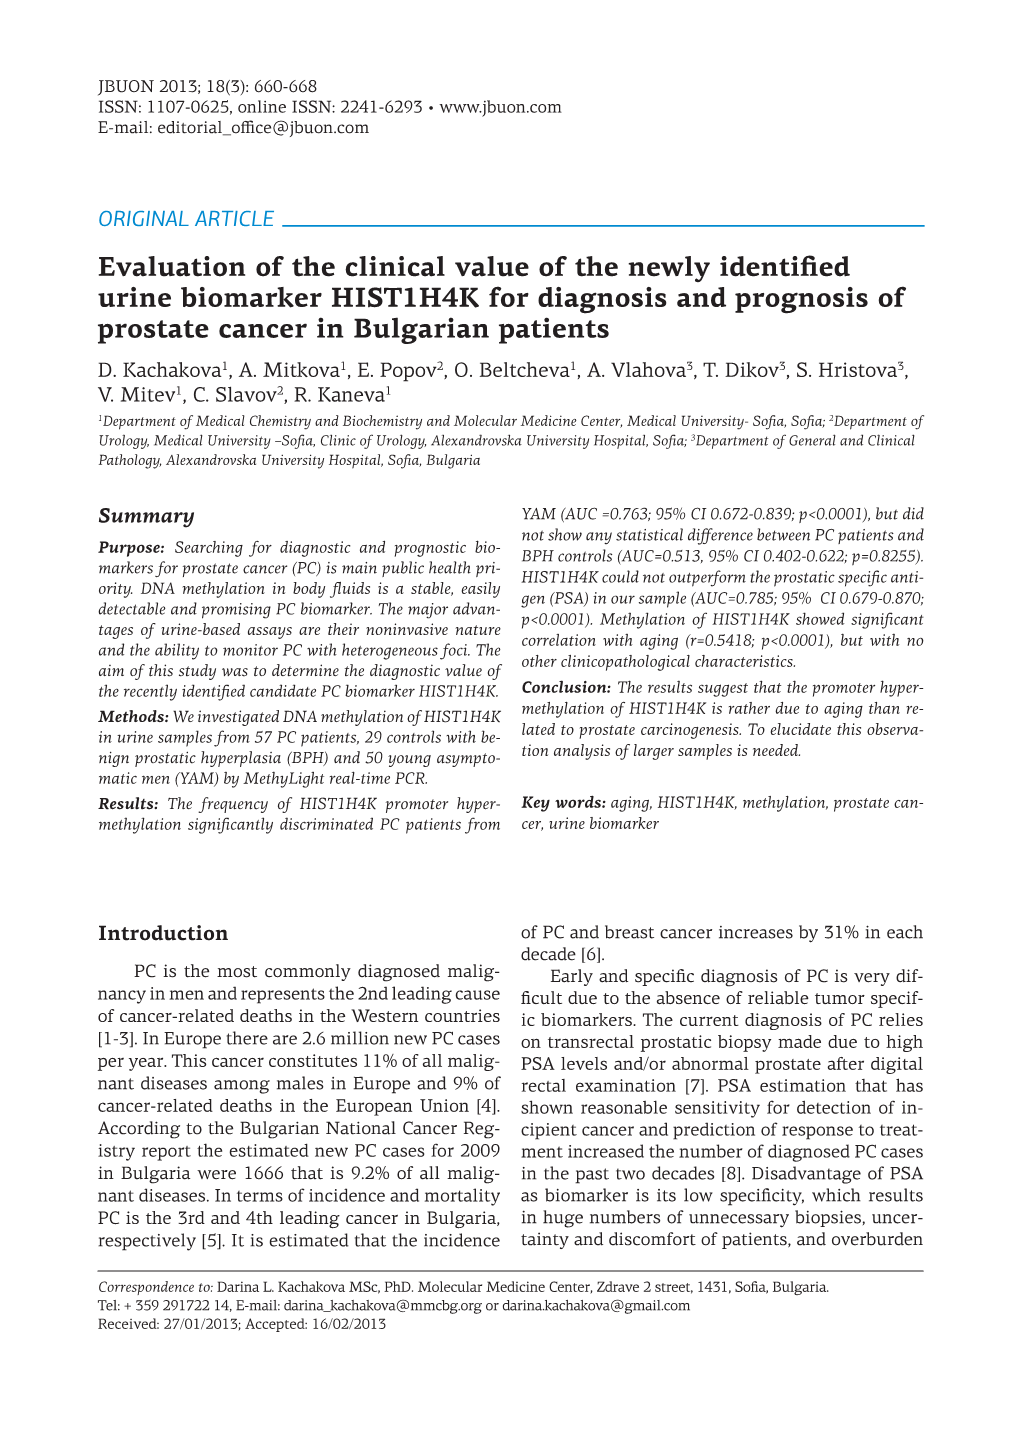 Evaluation of the Clinical Value of the Newly Identified Urine Biomarker HIST1H4K for Diagnosis and Prognosis of Prostate Cancer in Bulgarian Patients D